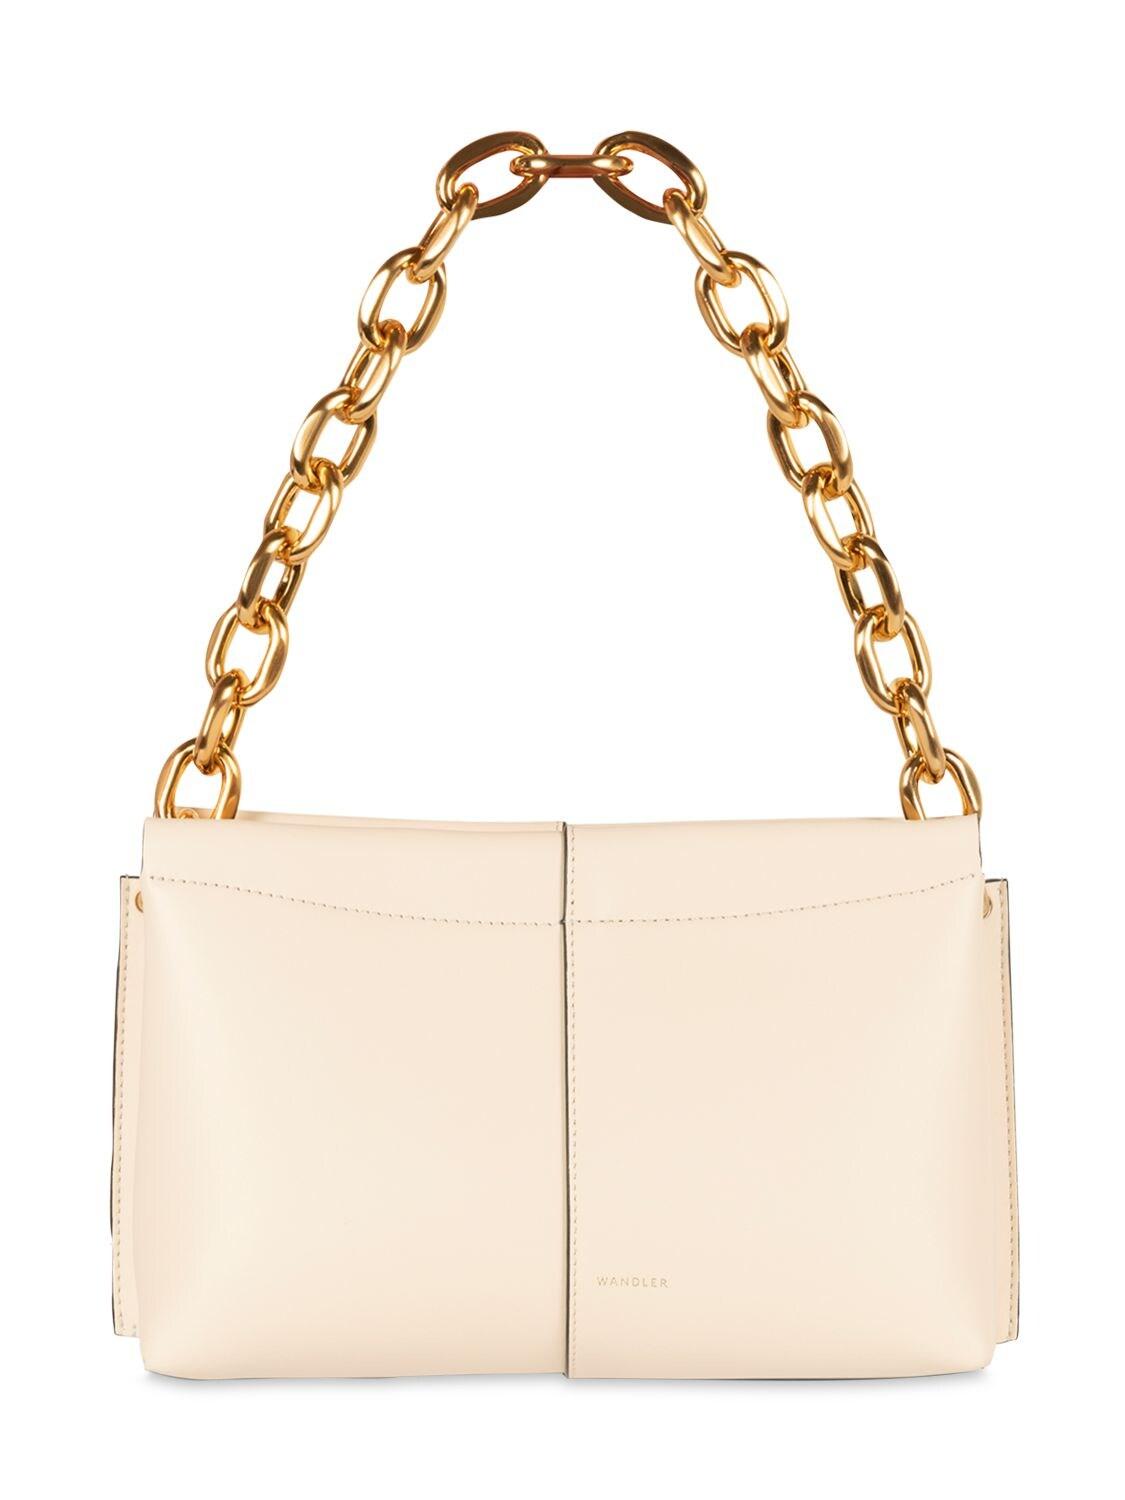 Wandler Carly Mini Heavy Chain Leather Bag in Ivory (White) | Lyst